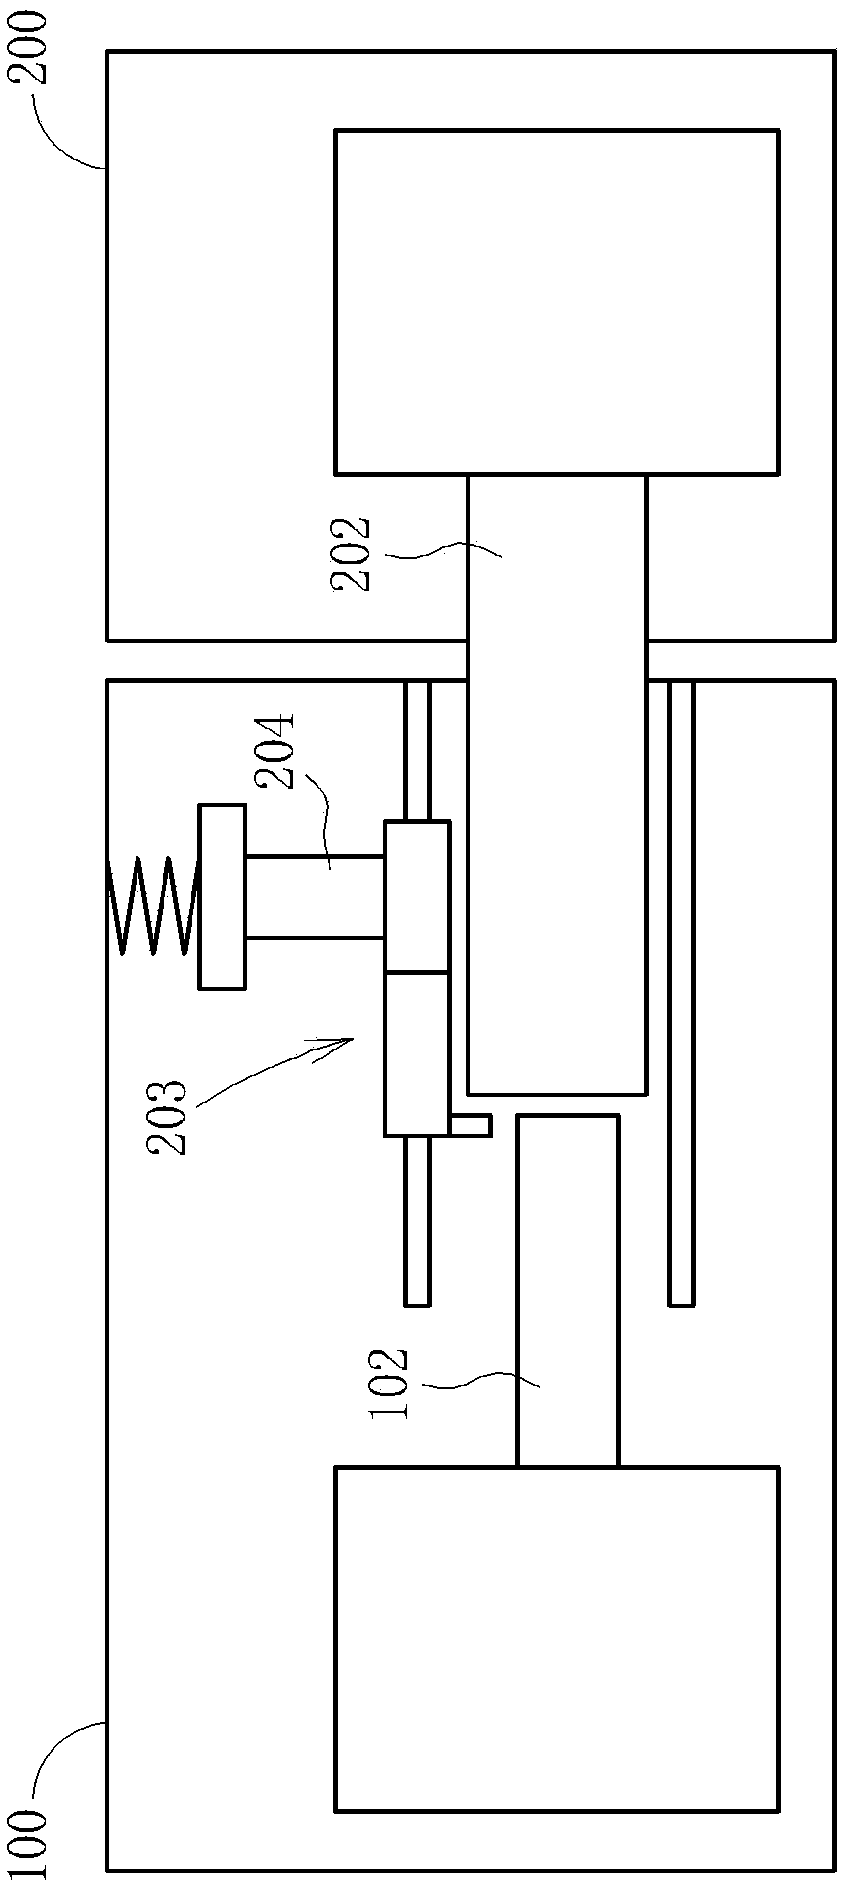 Endoscope apparatus with forced disposability